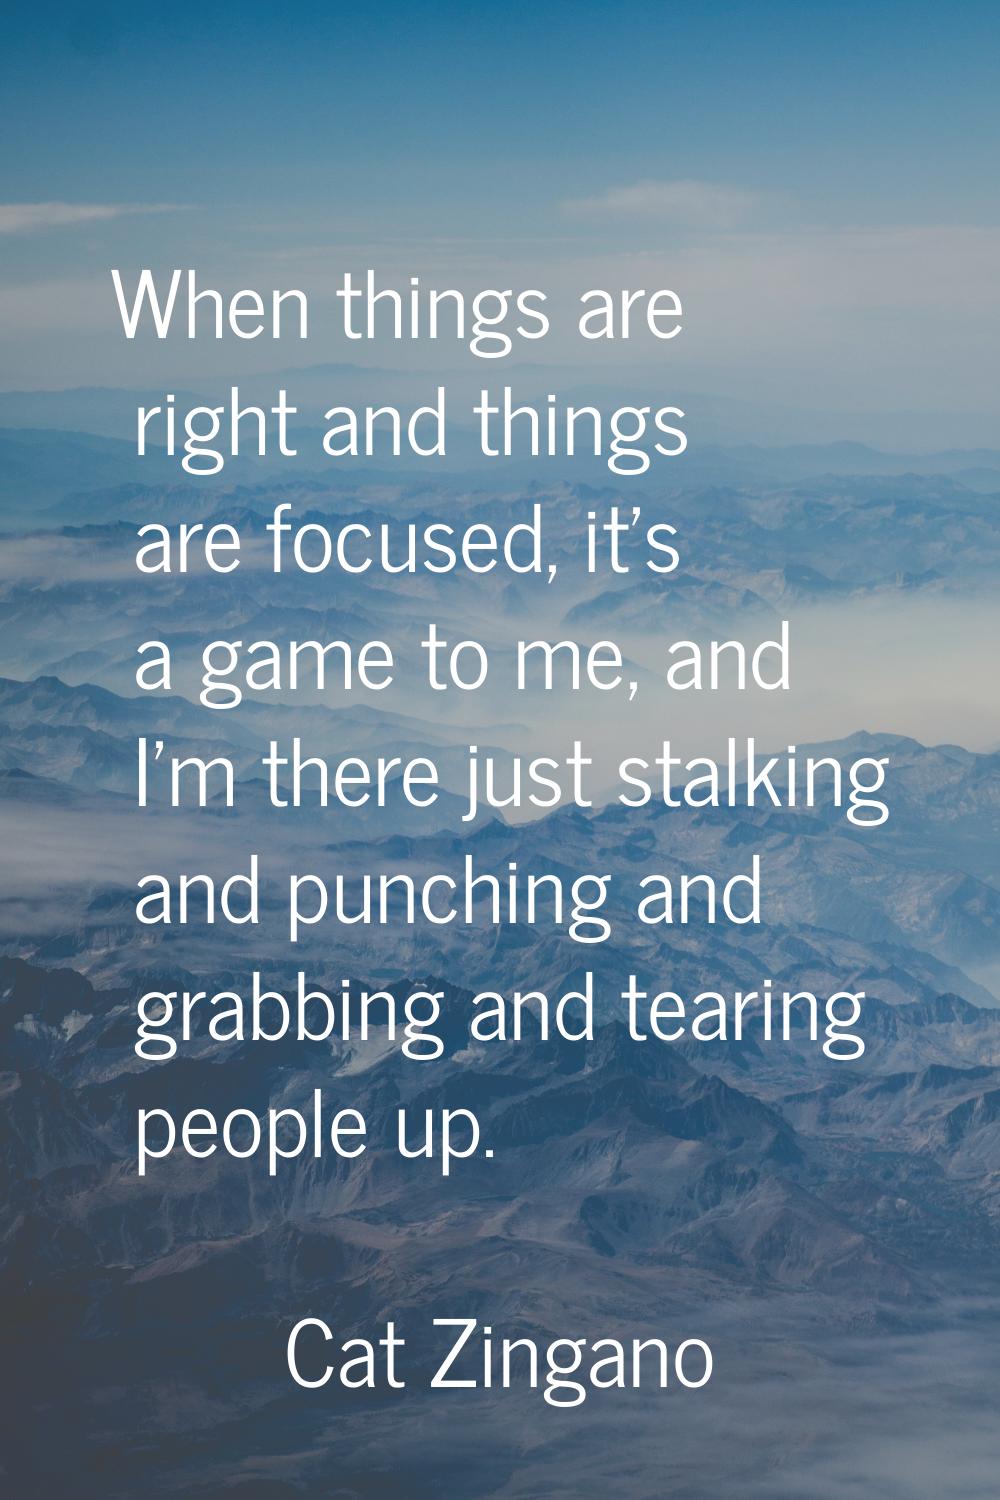 When things are right and things are focused, it's a game to me, and I'm there just stalking and pu